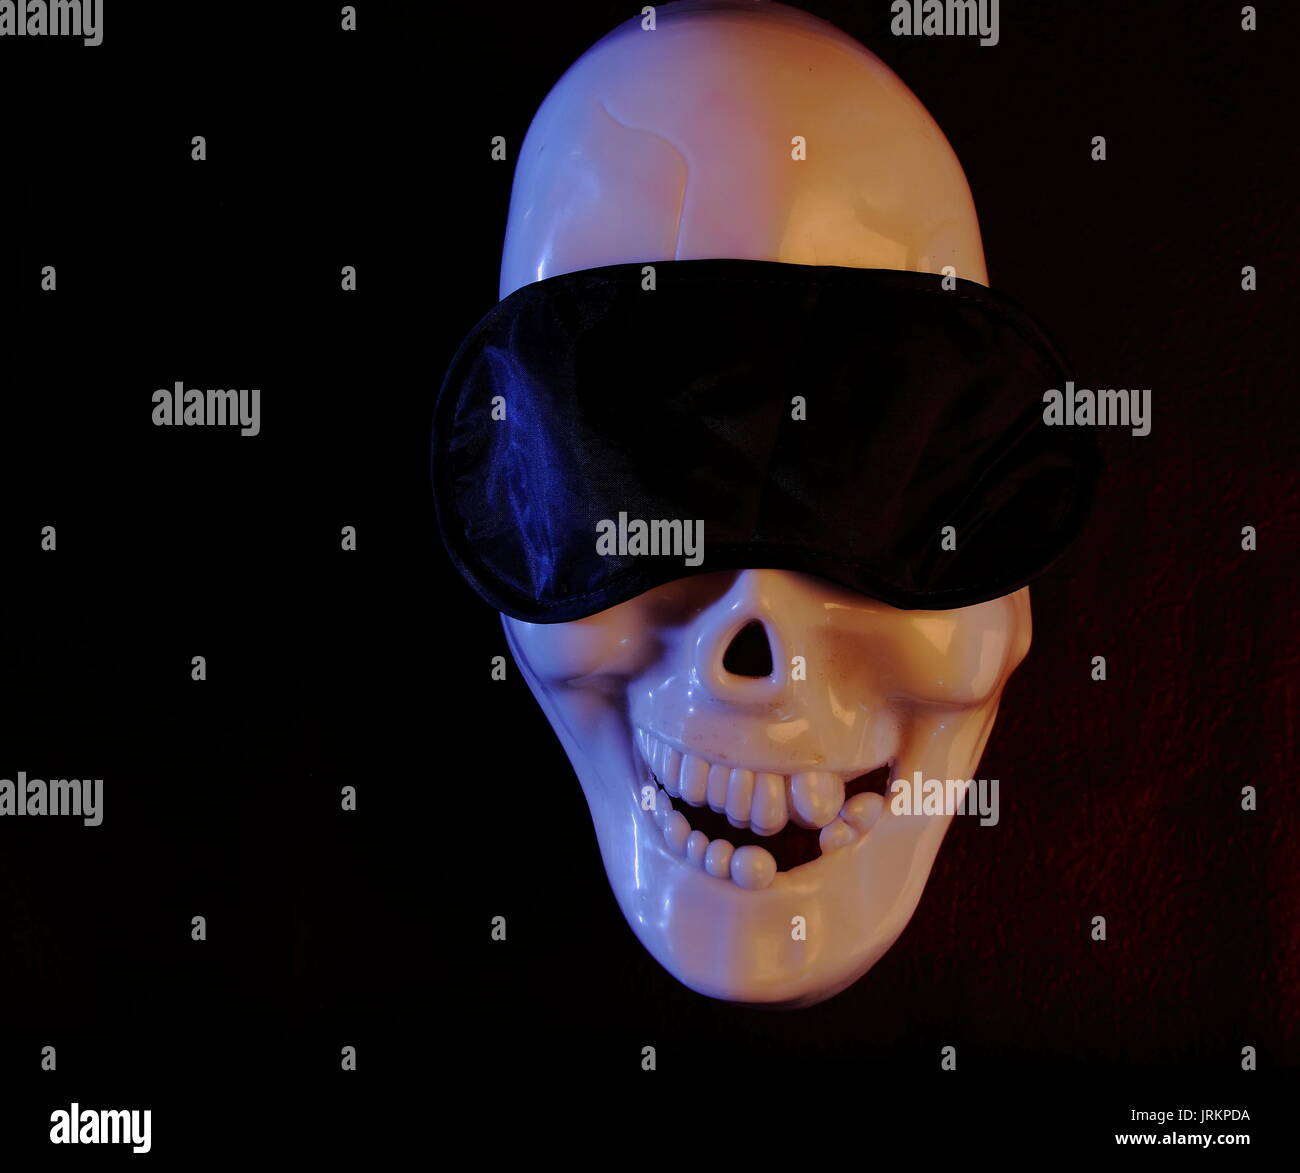 A skull mask with a sleeping eye cover on in landscape format with a dark background and copy space Stock Photo